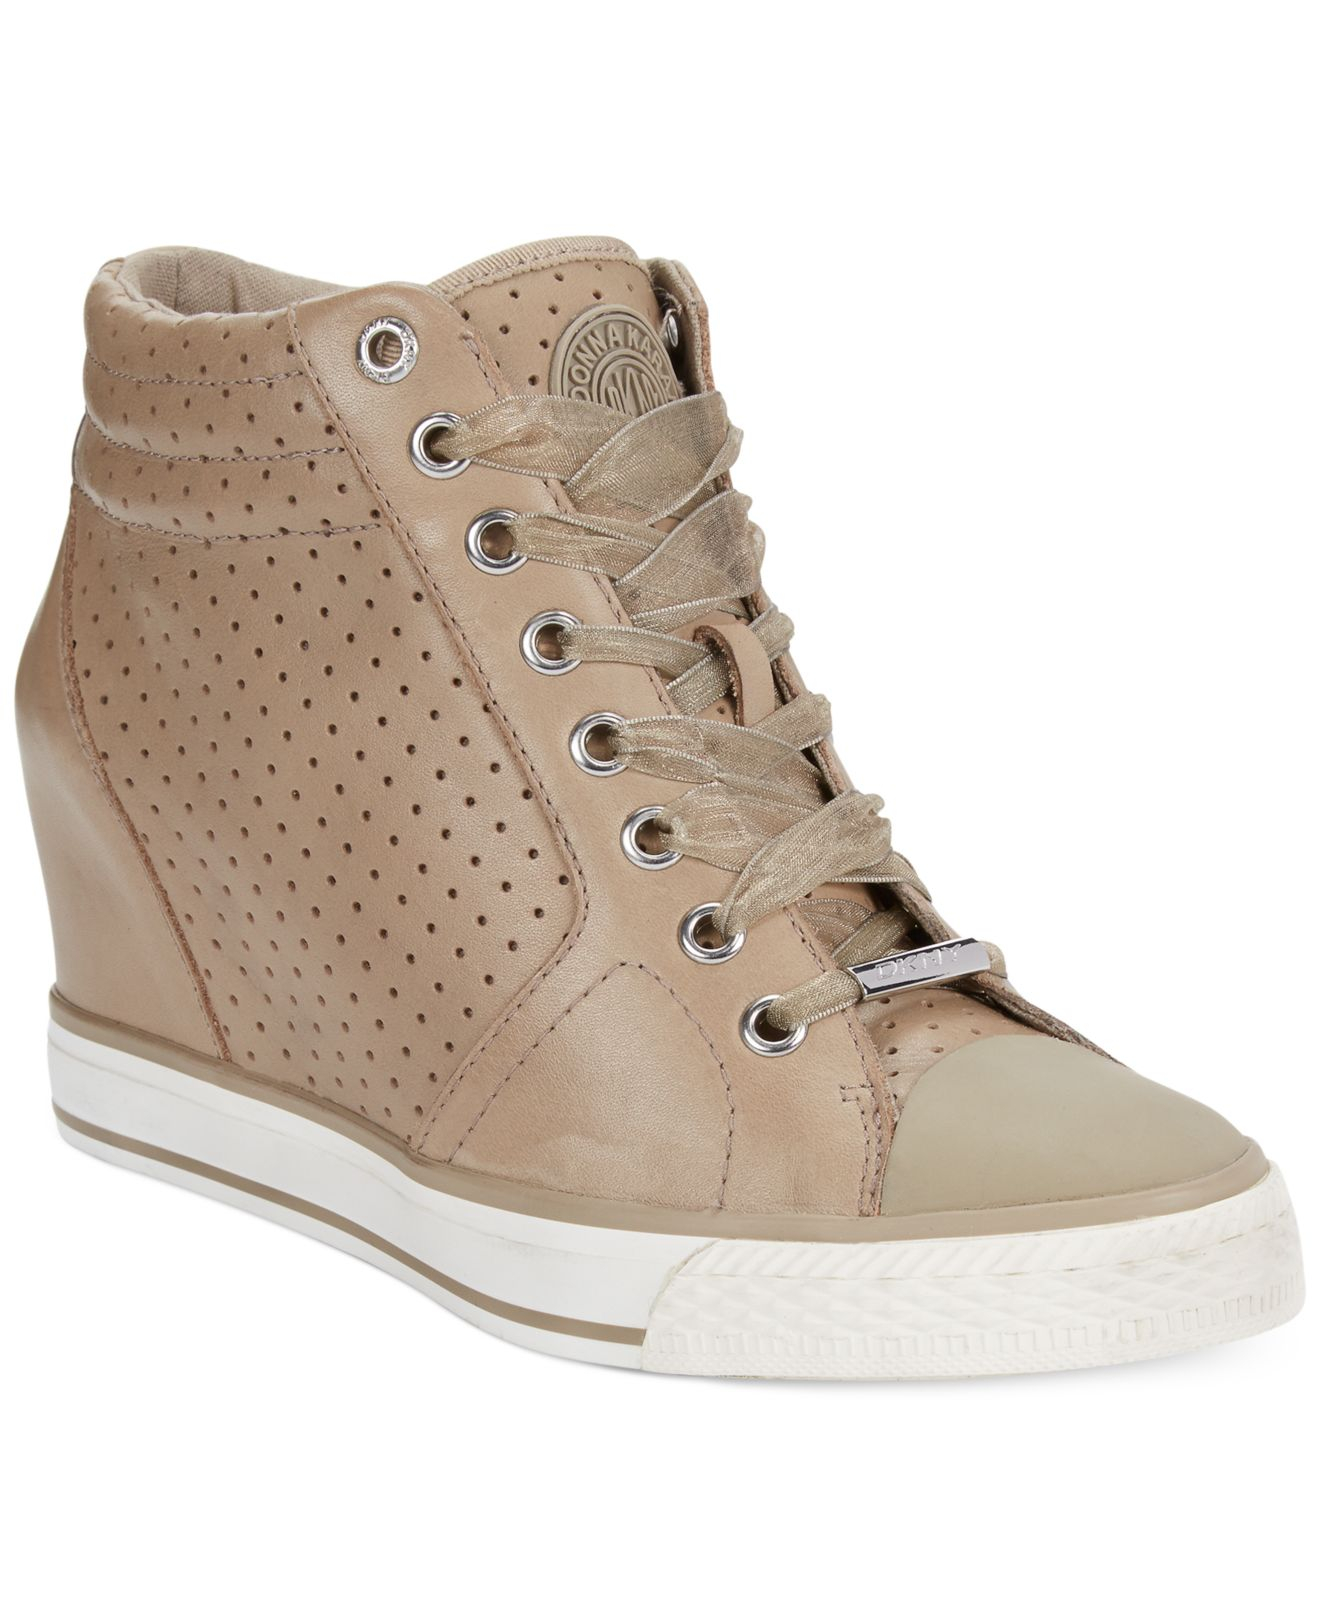 Lyst - Dkny Cindy Wedge Sneakers in Natural